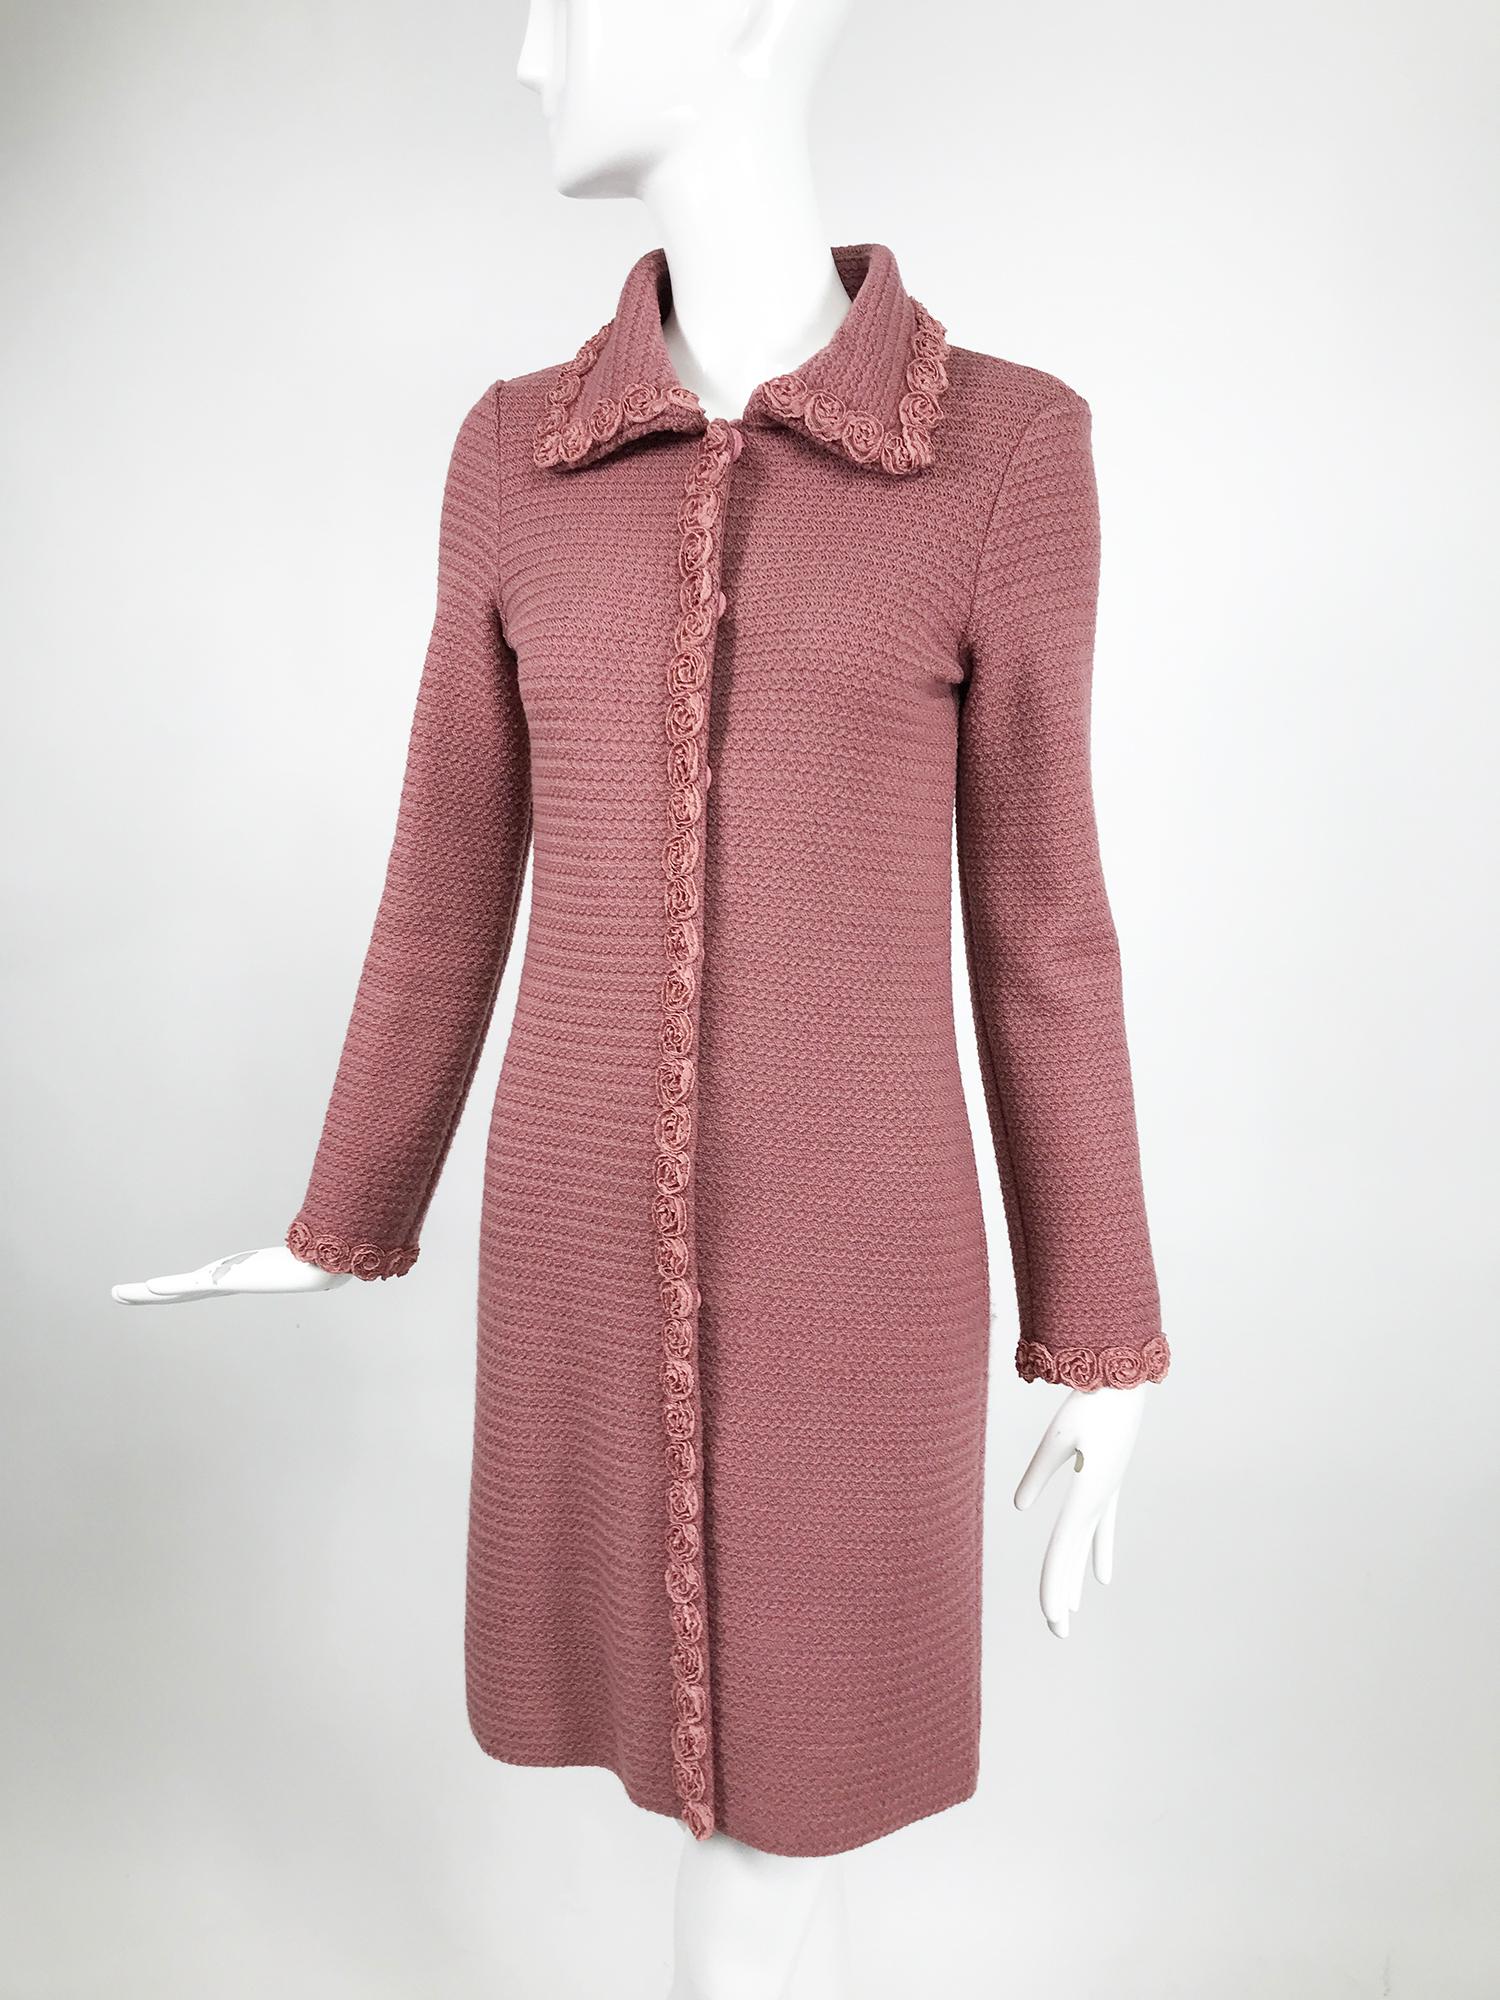 Moschino Pink Wool Knit Coat with Rosette Lace Trims 5